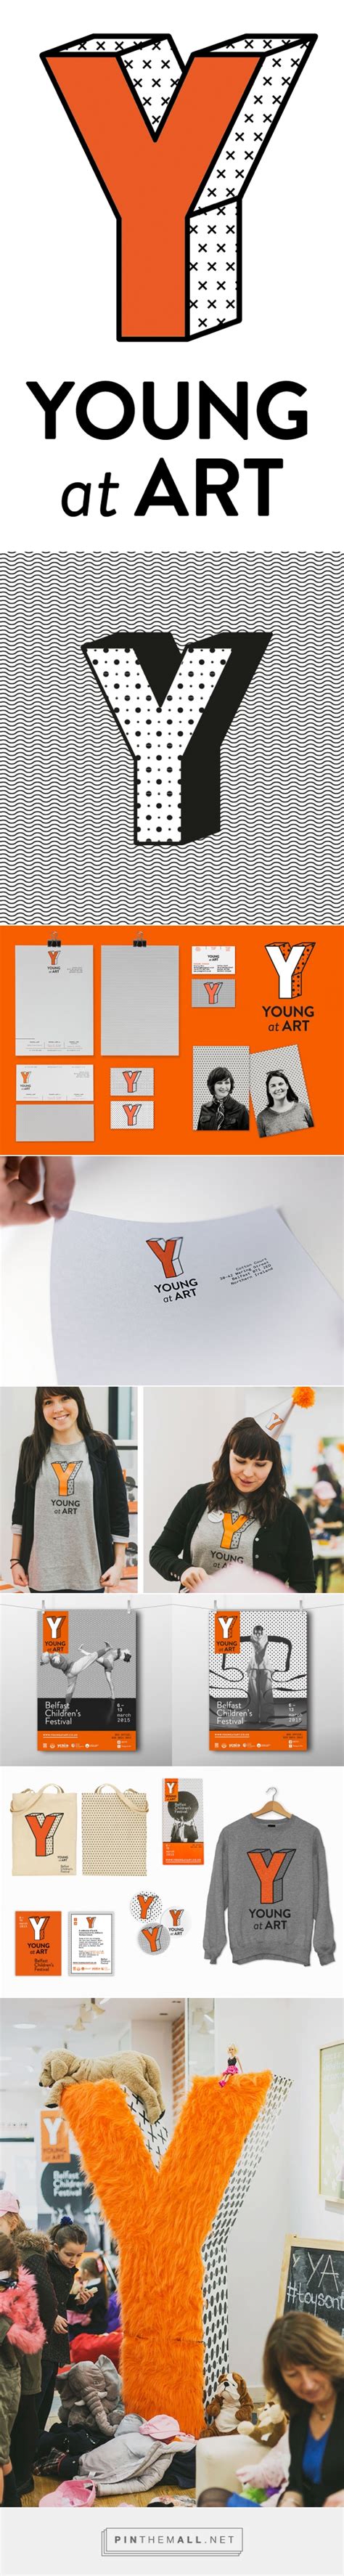 Brand New New Logo And Identity For Young At Art By Paperjam Created